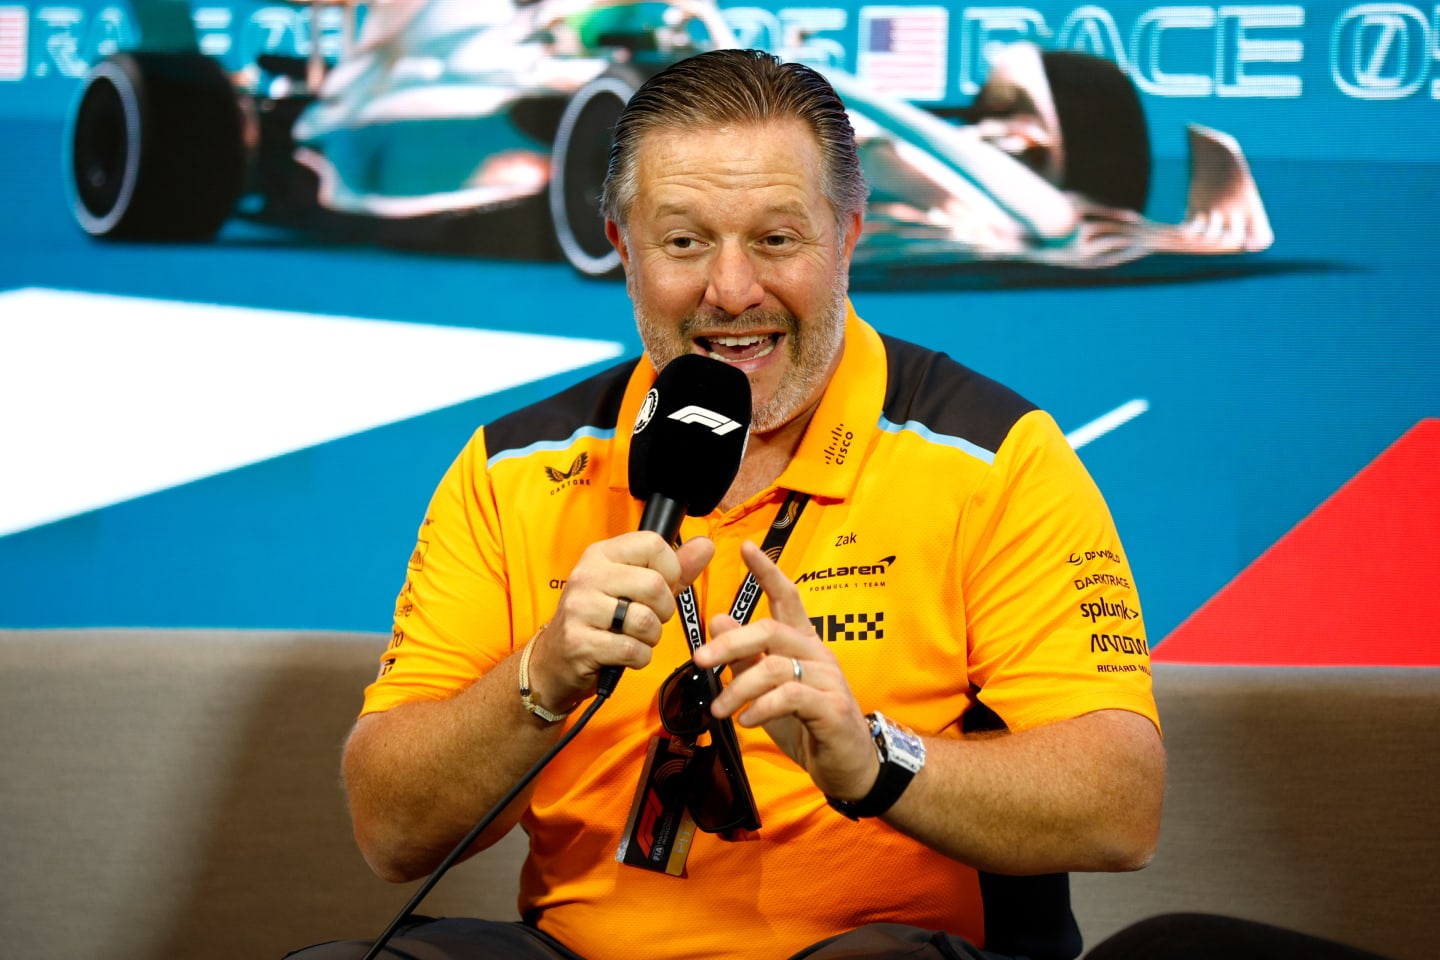 MIAMI, FLORIDA - MAY 05: McLaren Chief Executive Officer Zak Brown attends the Team Principals Press Conference during practice ahead of the F1 Grand Prix of Miami at Miami International Autodrome on May 05, 2023 in Miami, Florida. (Photo by Jared C. Tilton/Getty Images)